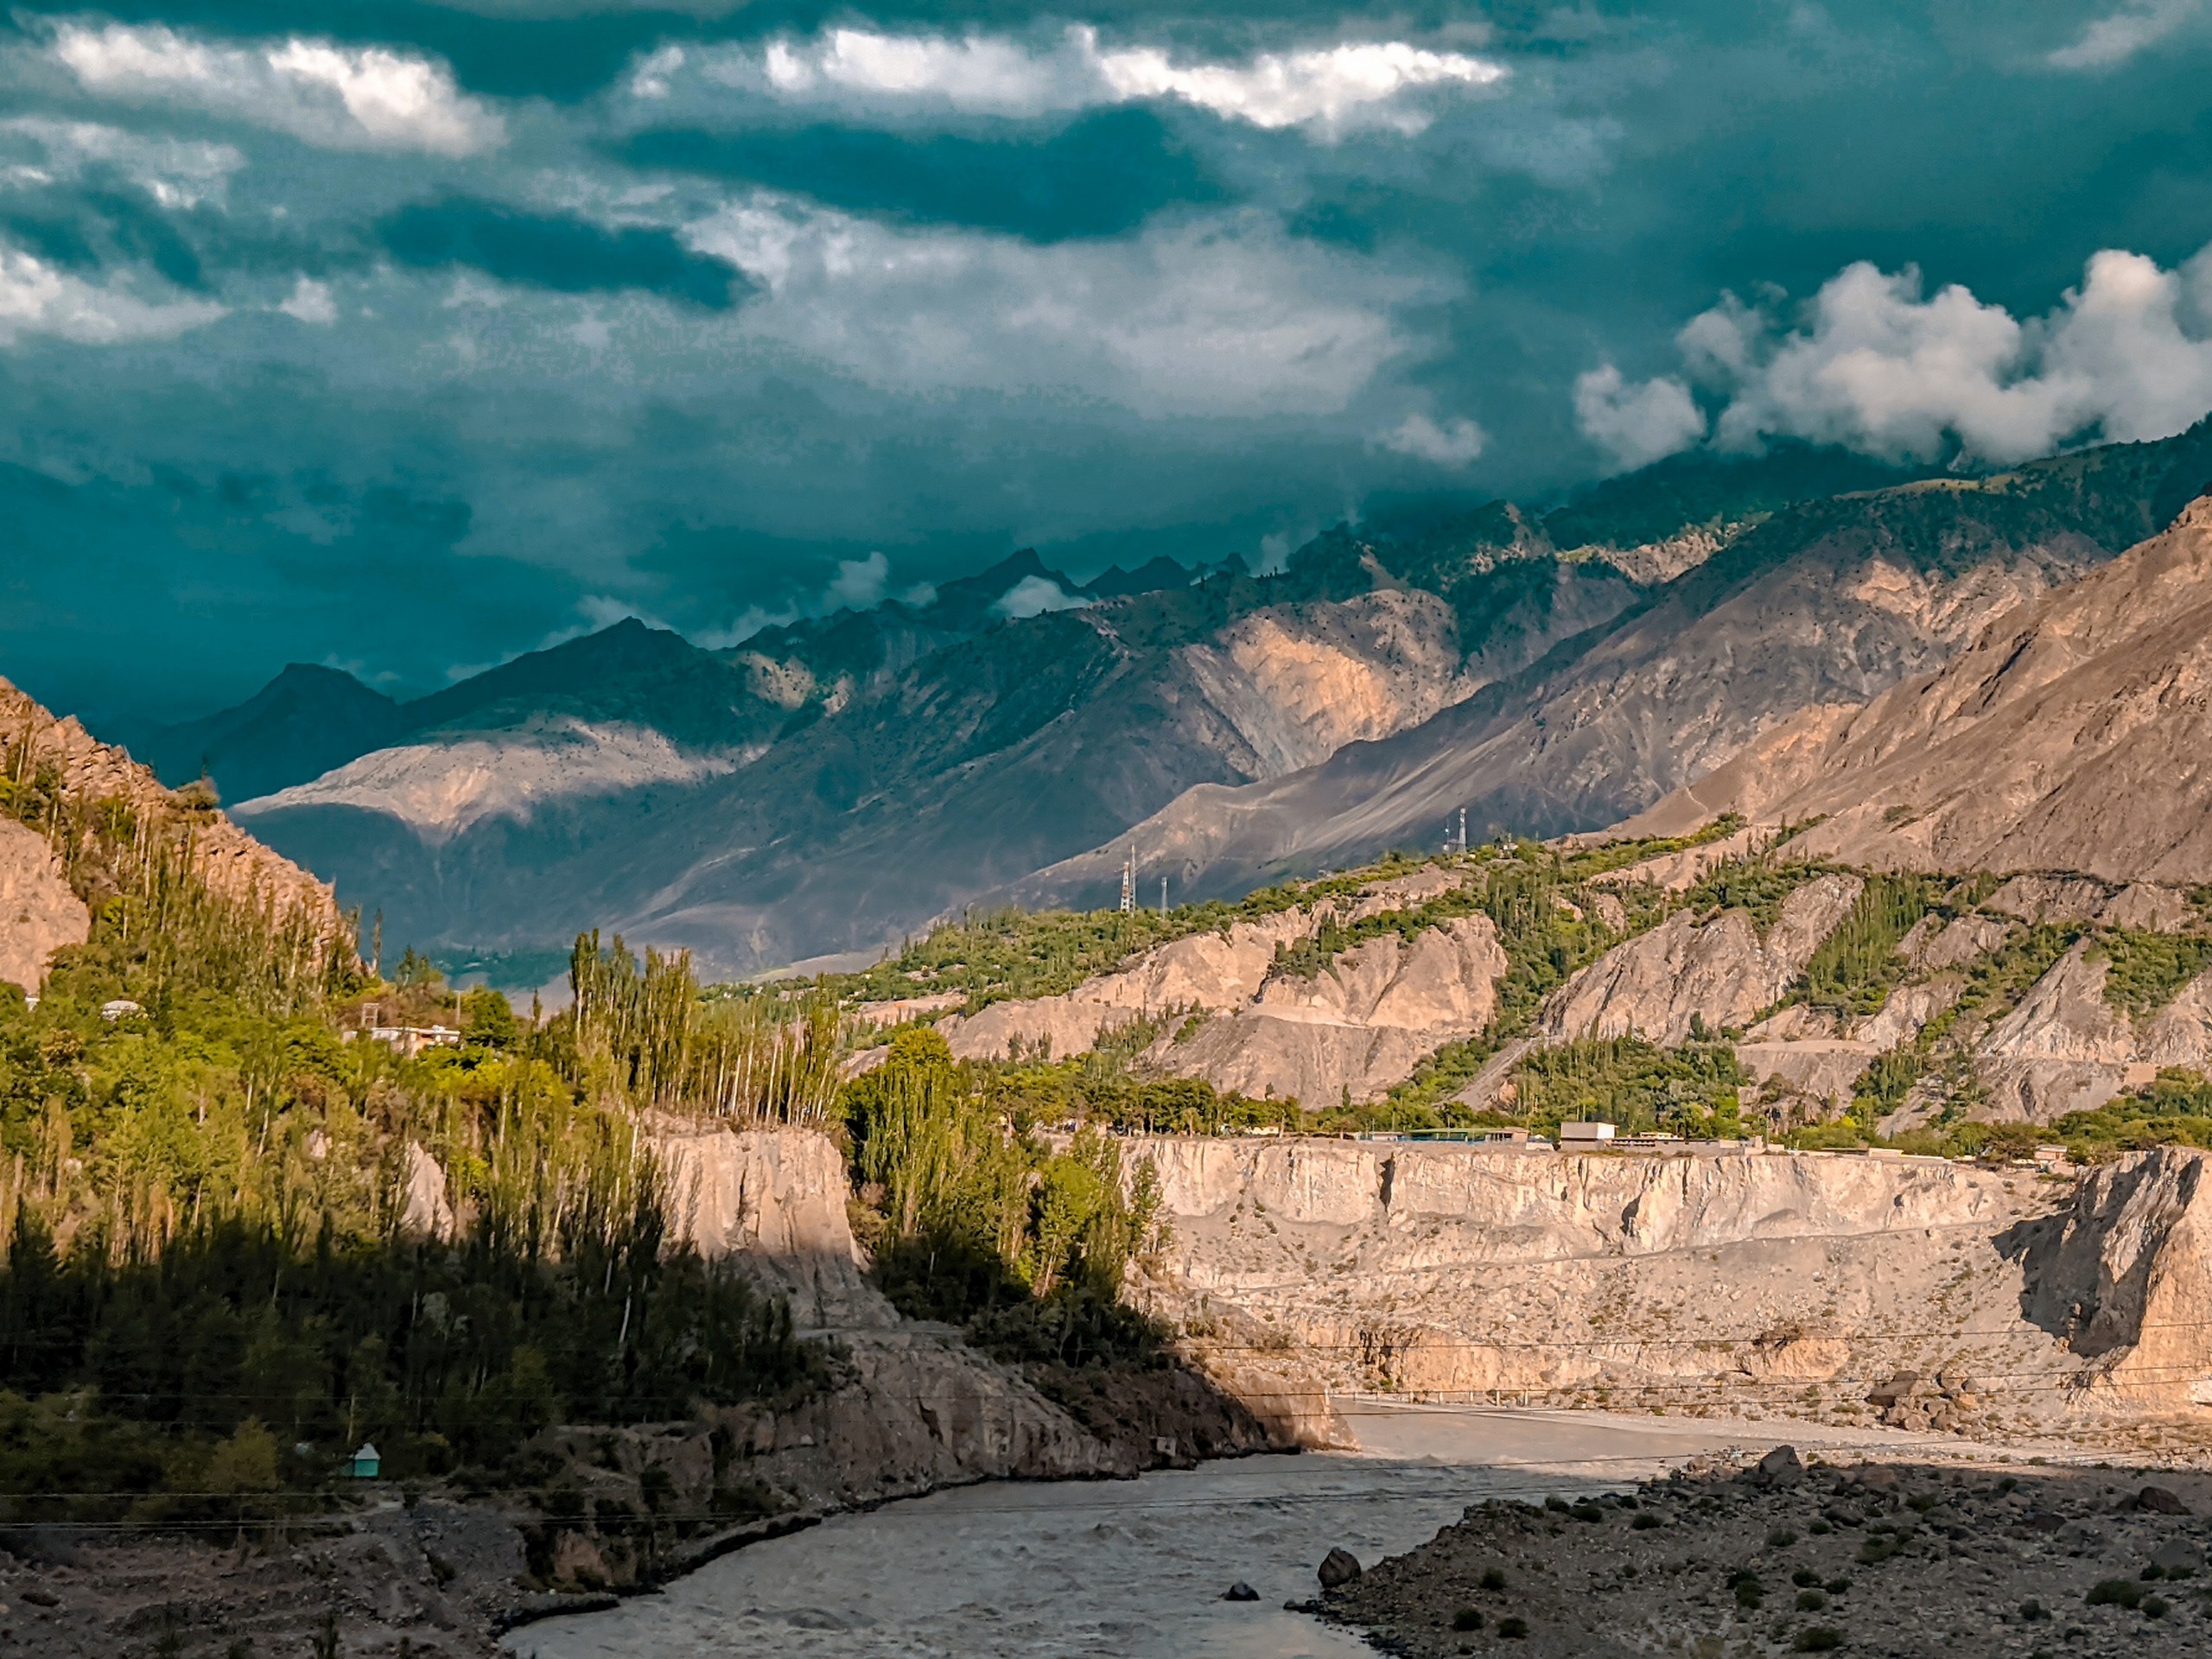 Stunning nature views along the highway in Hunza, Pakistan